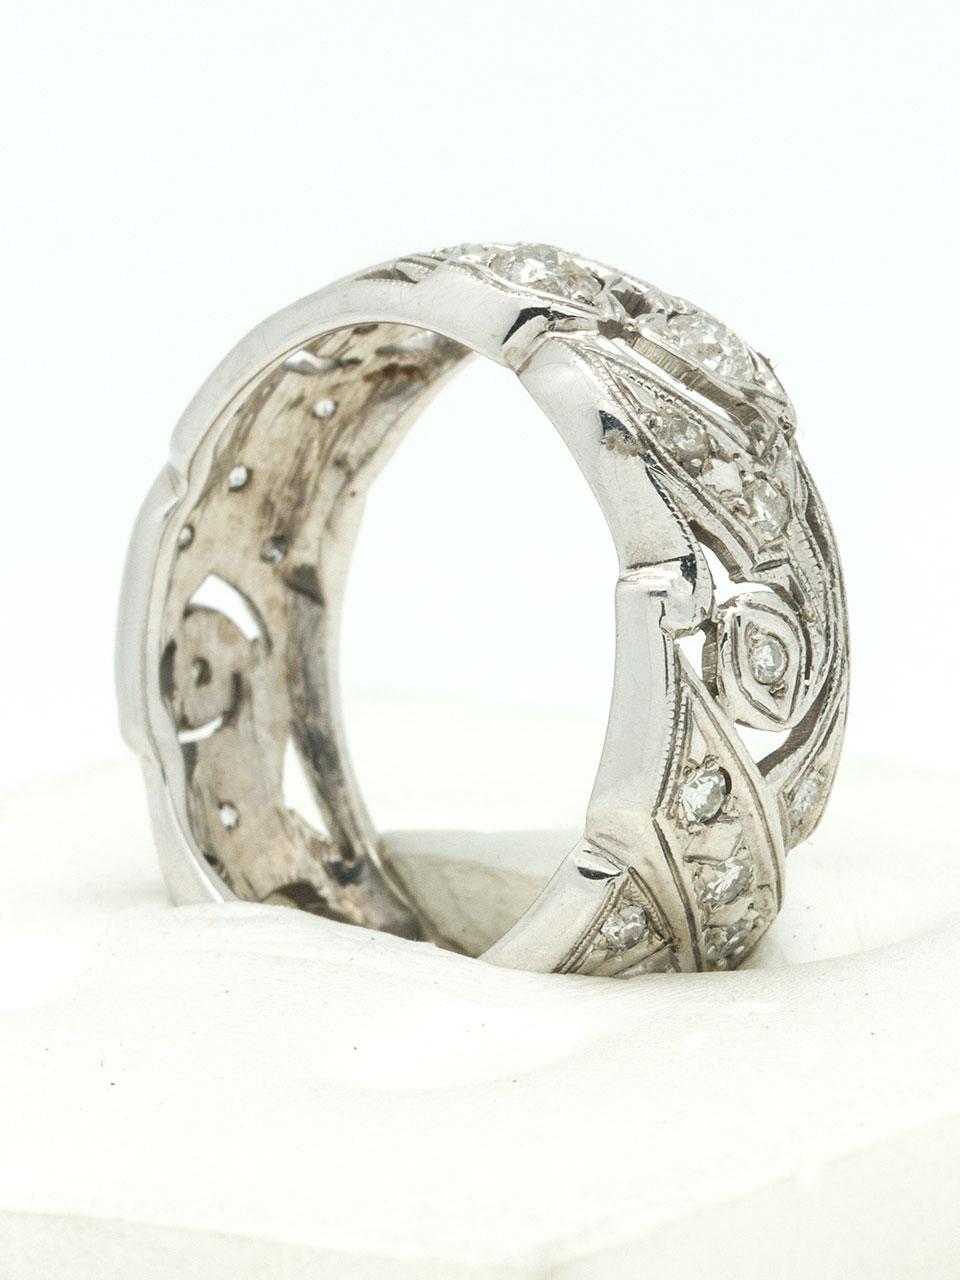 Beautifully carved vintage 14K white gold 8mm wide diamond eternity band set with approximately 0.50cts diamonds. Size 8, cannot be adjusted. Circa 1940s.

SKU: 27636